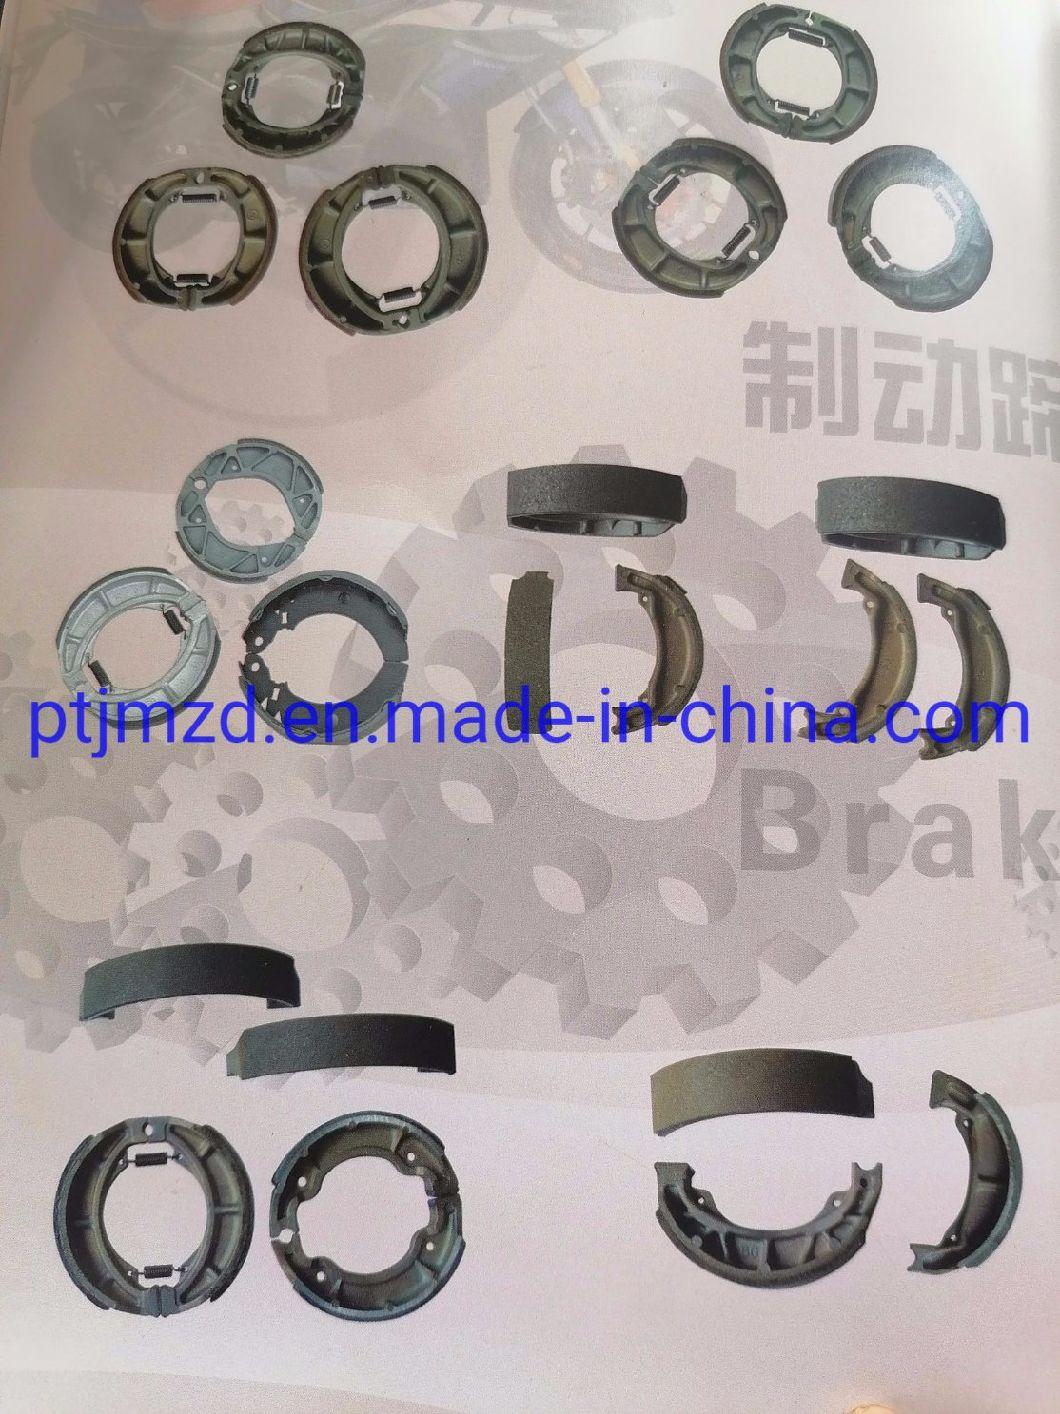 Motorcycle Brake Shoes. Motorcycle Parts, Auto Spare Part--Jc50q-G